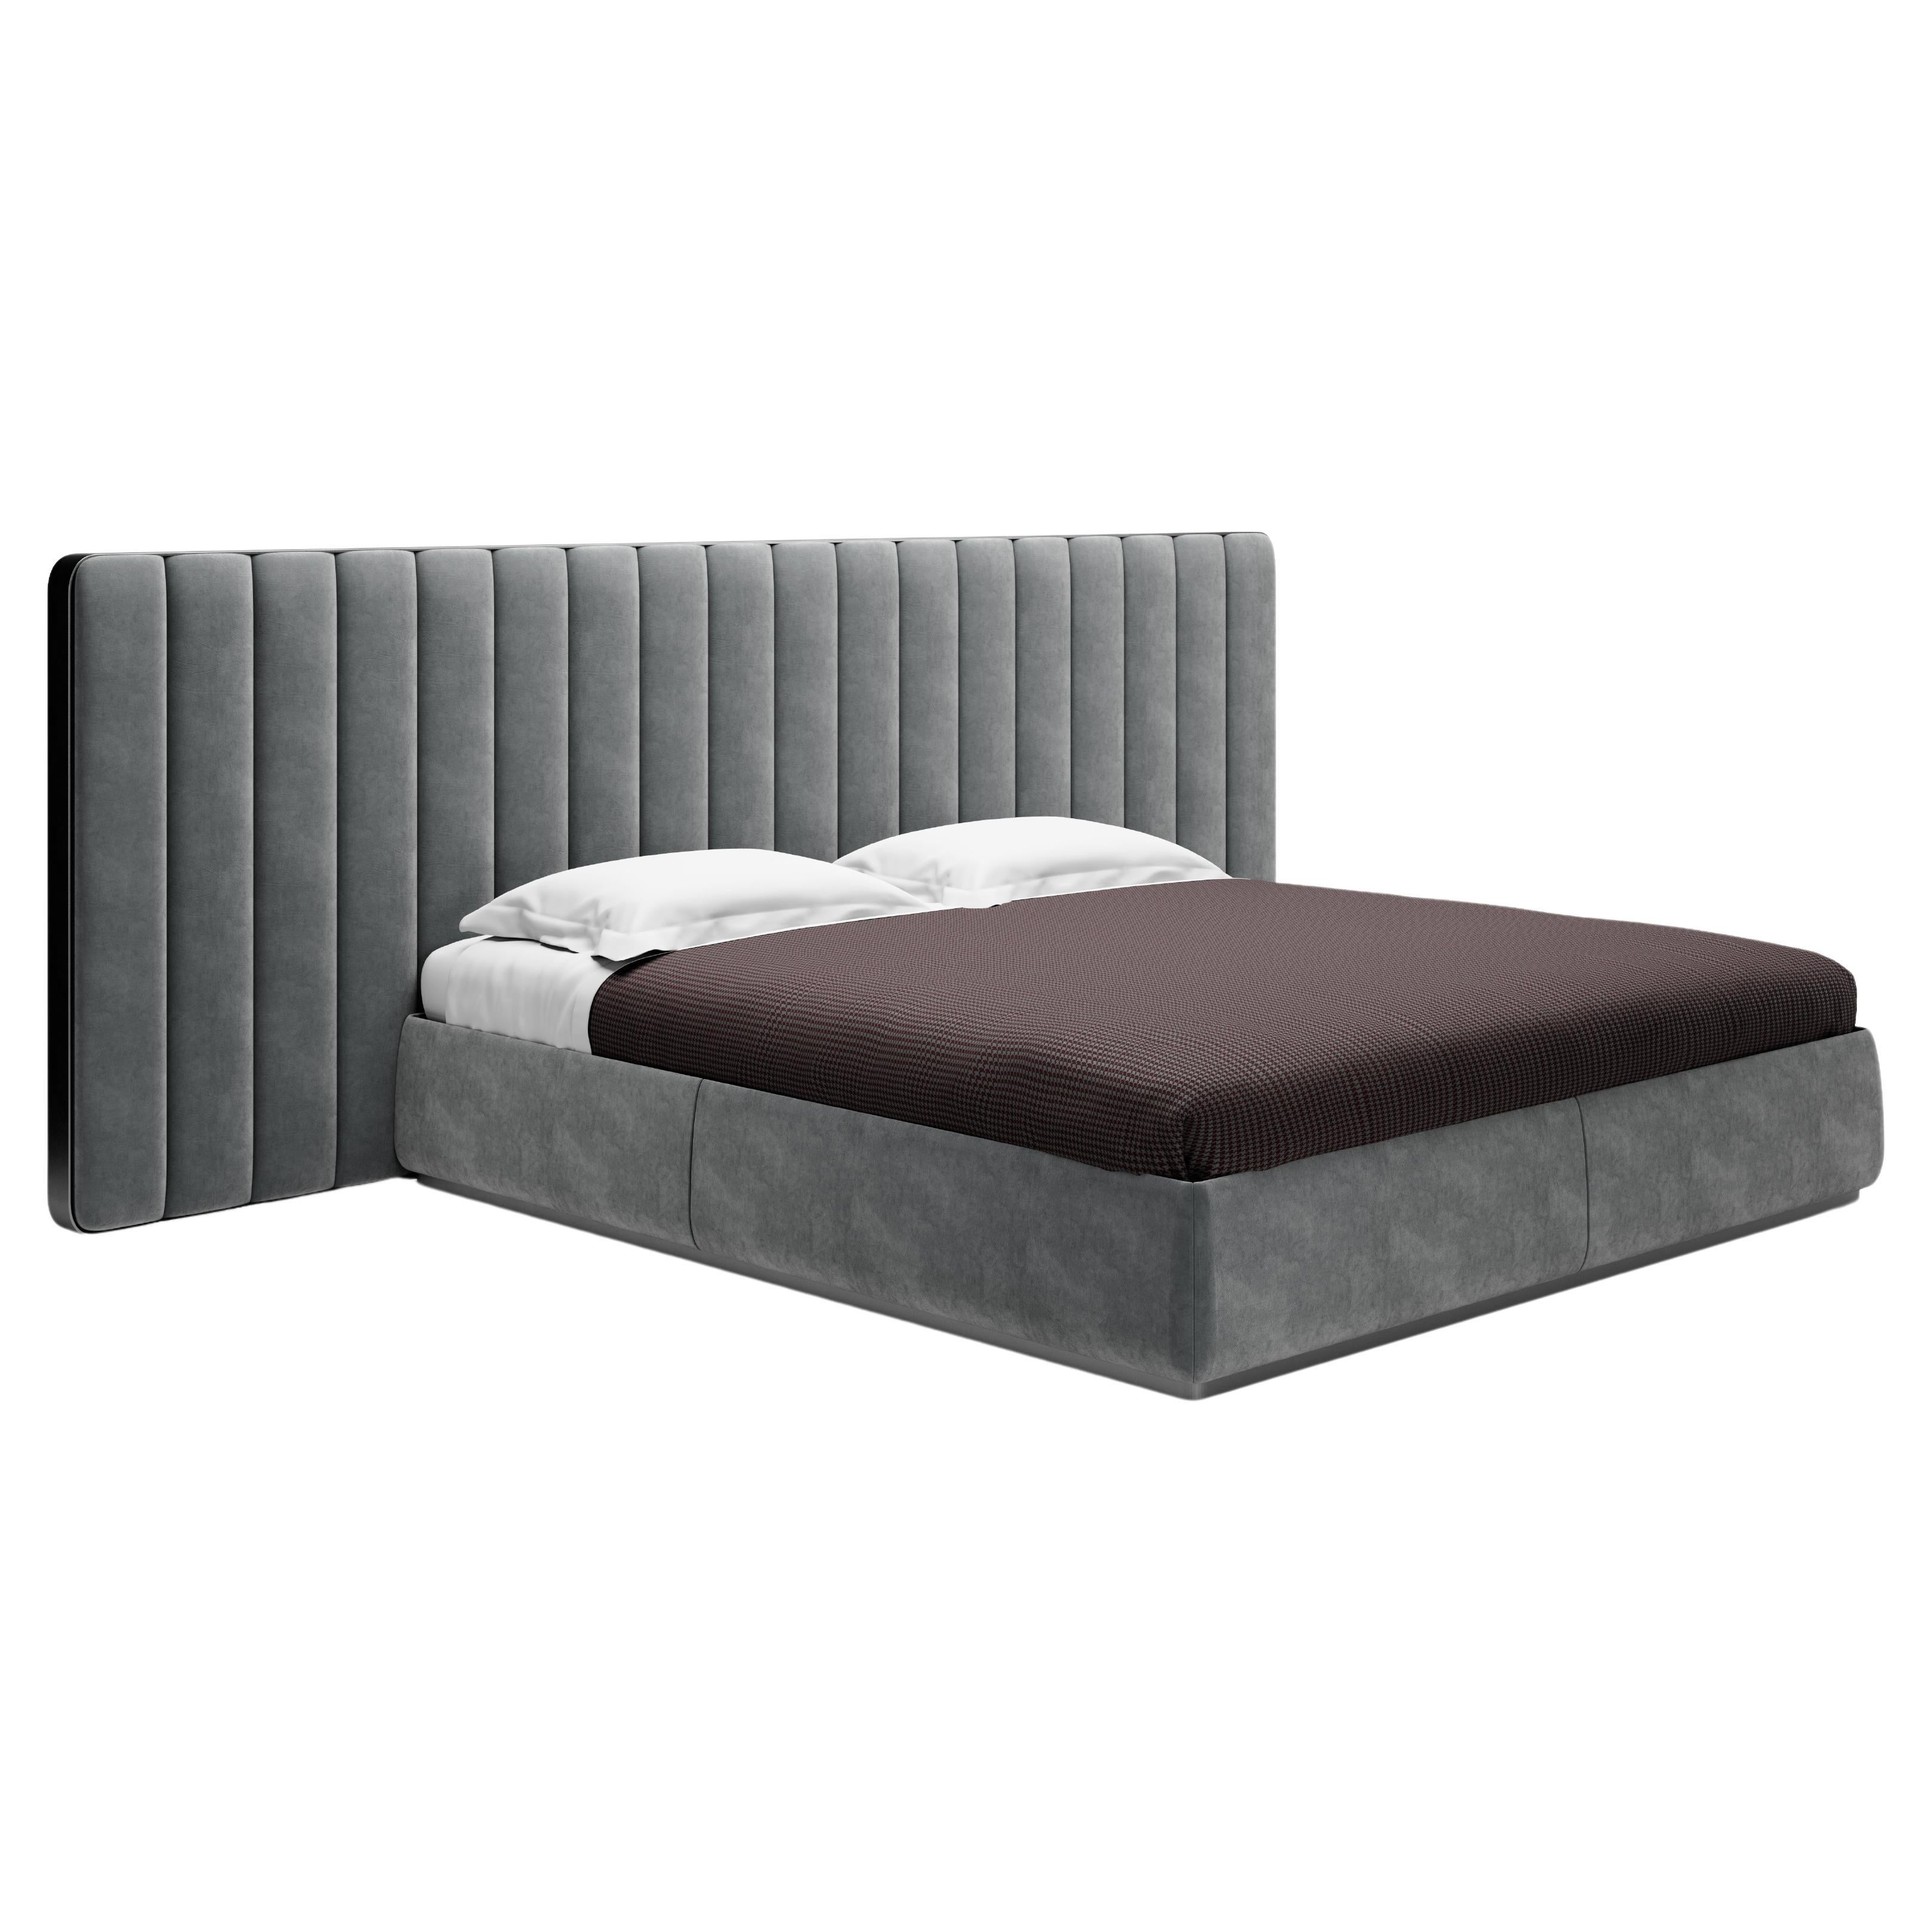 Douglas velvet double bed with upholstered head and one-movement bed base For Sale